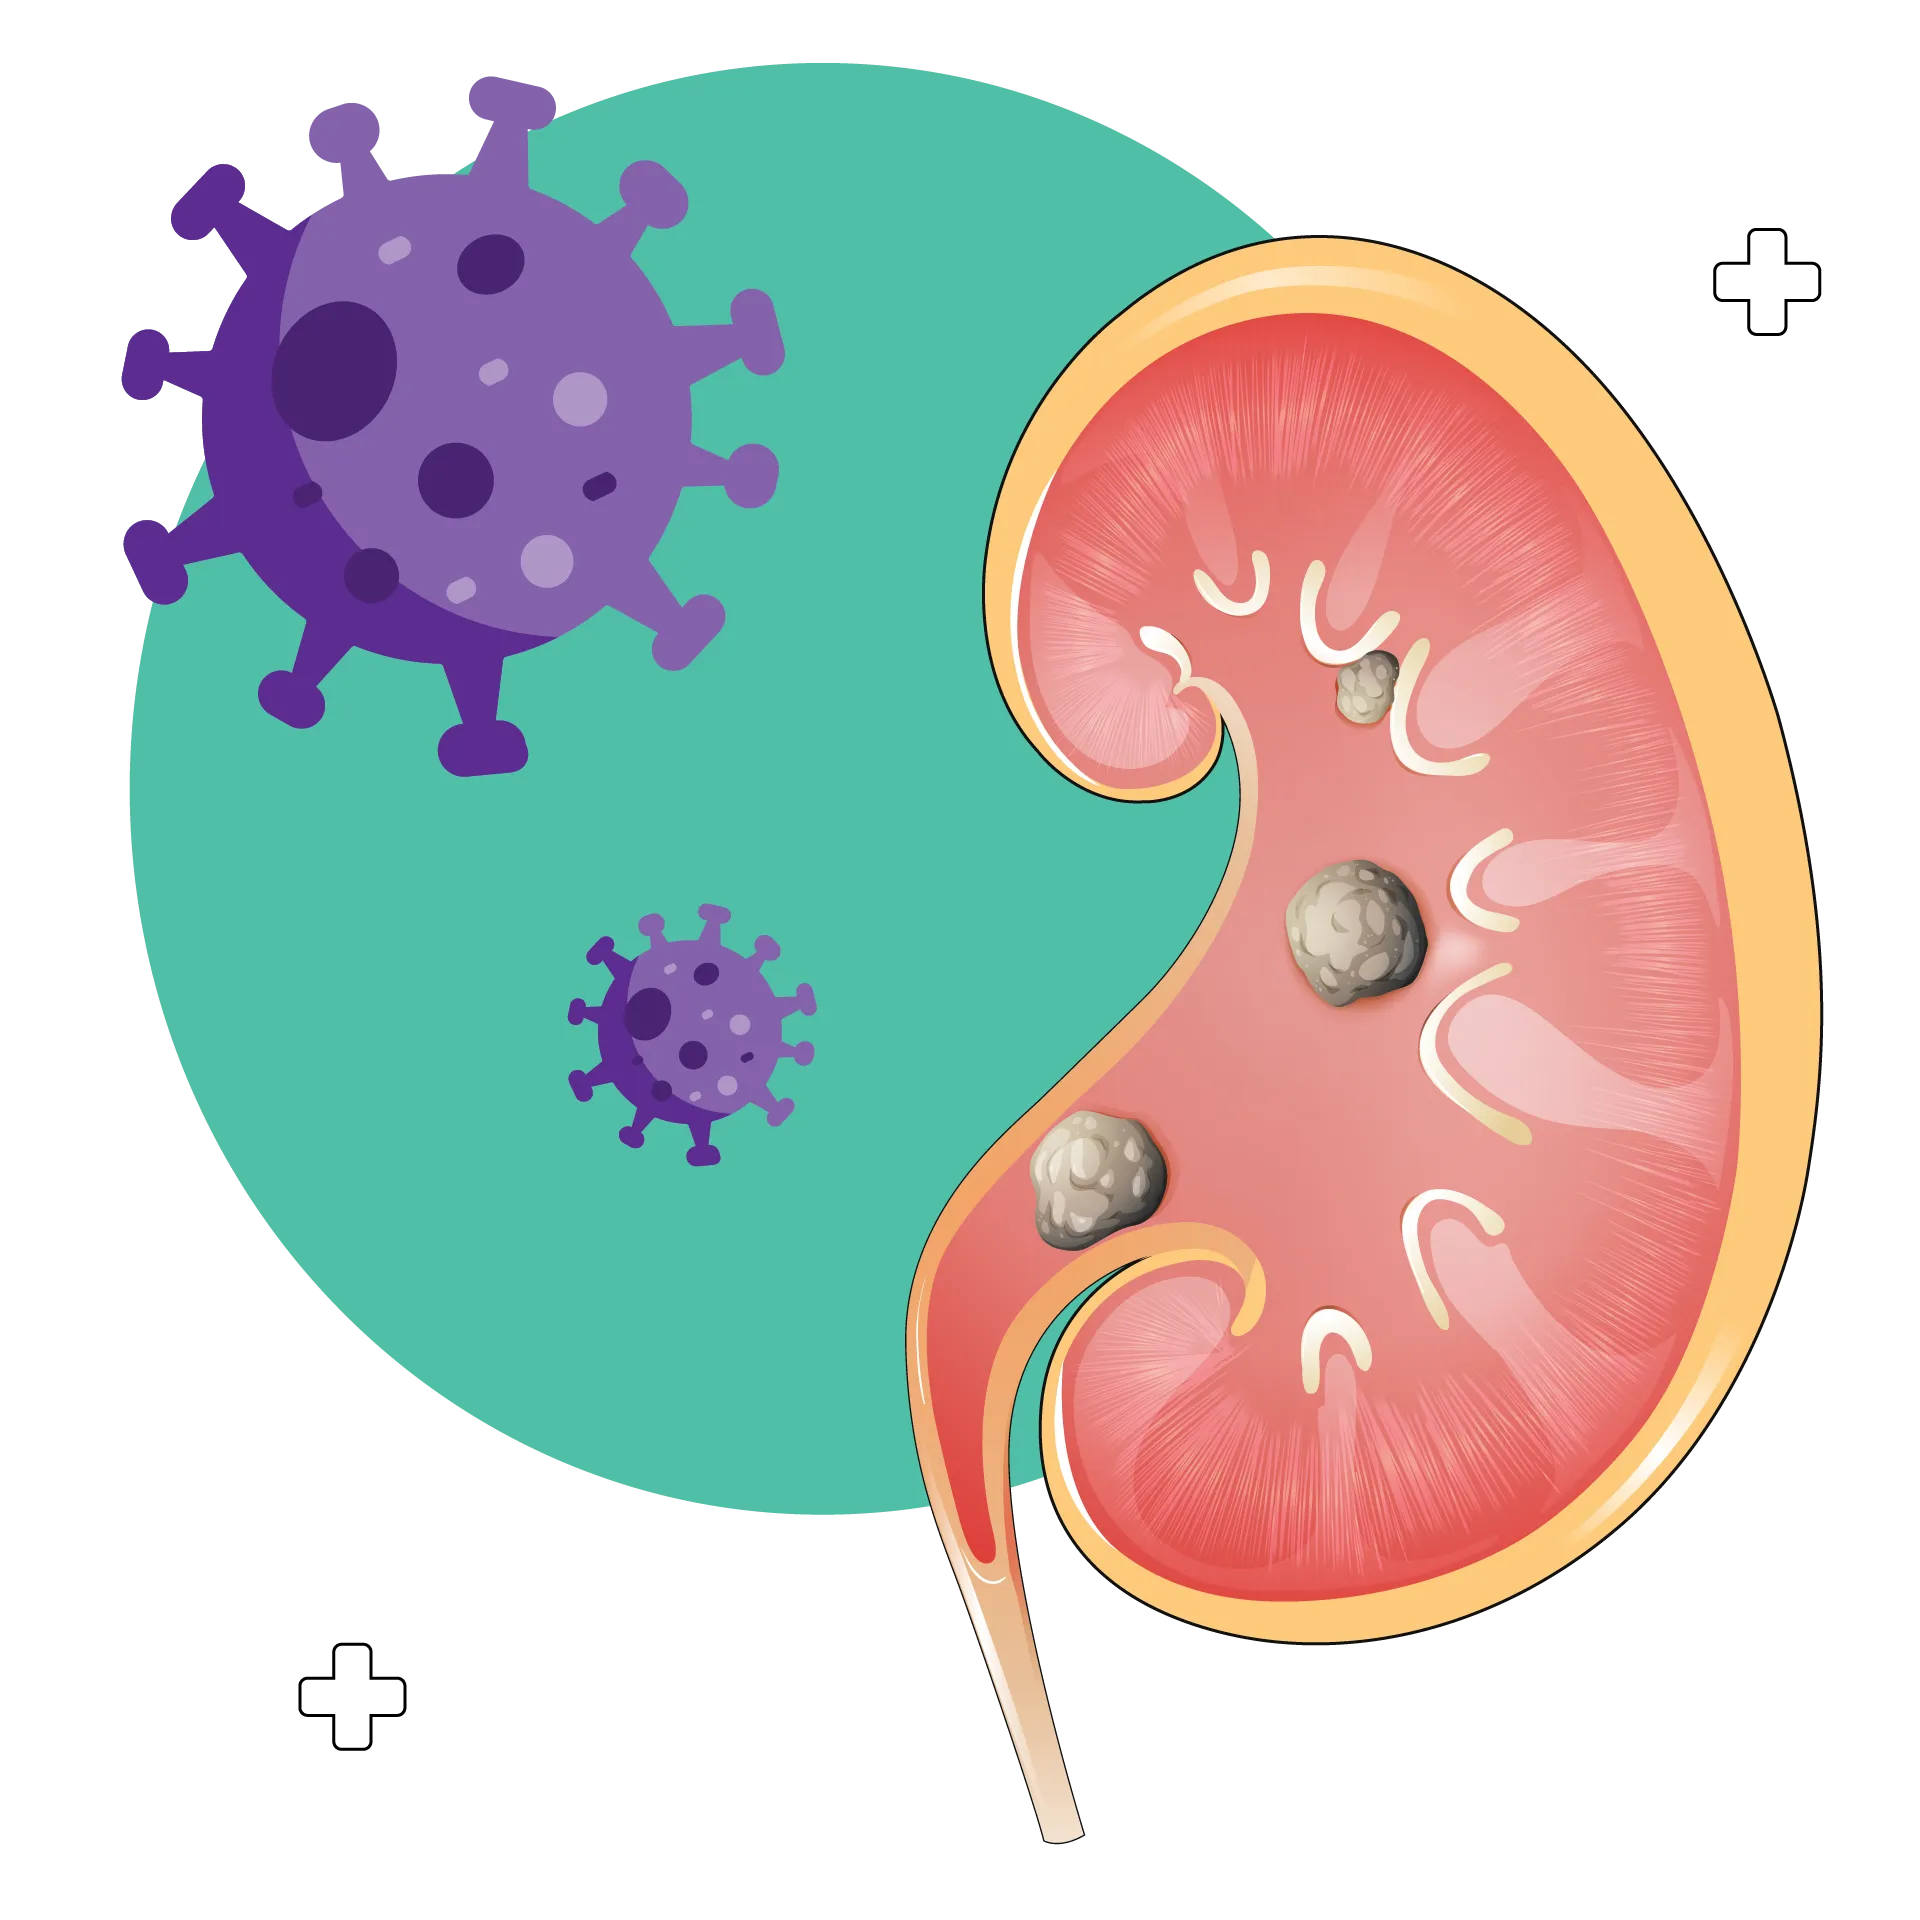 Kidney Disease and COVID-19: A Guide - 10